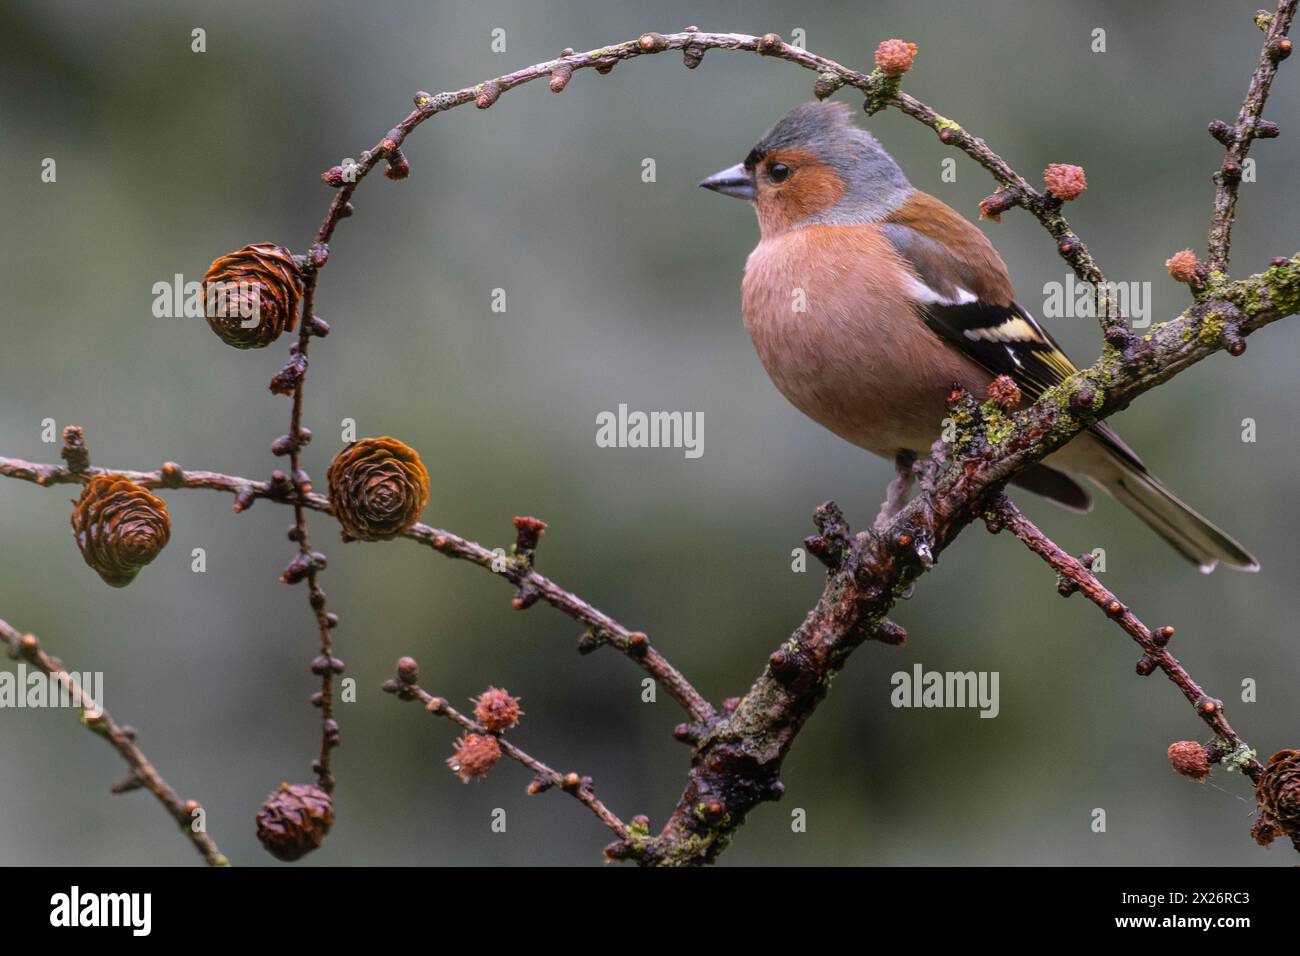 Common chaffinch (Fringilla coelebs) on a larch branch, Emsland, Lower Saxony, Germany Stock Photo